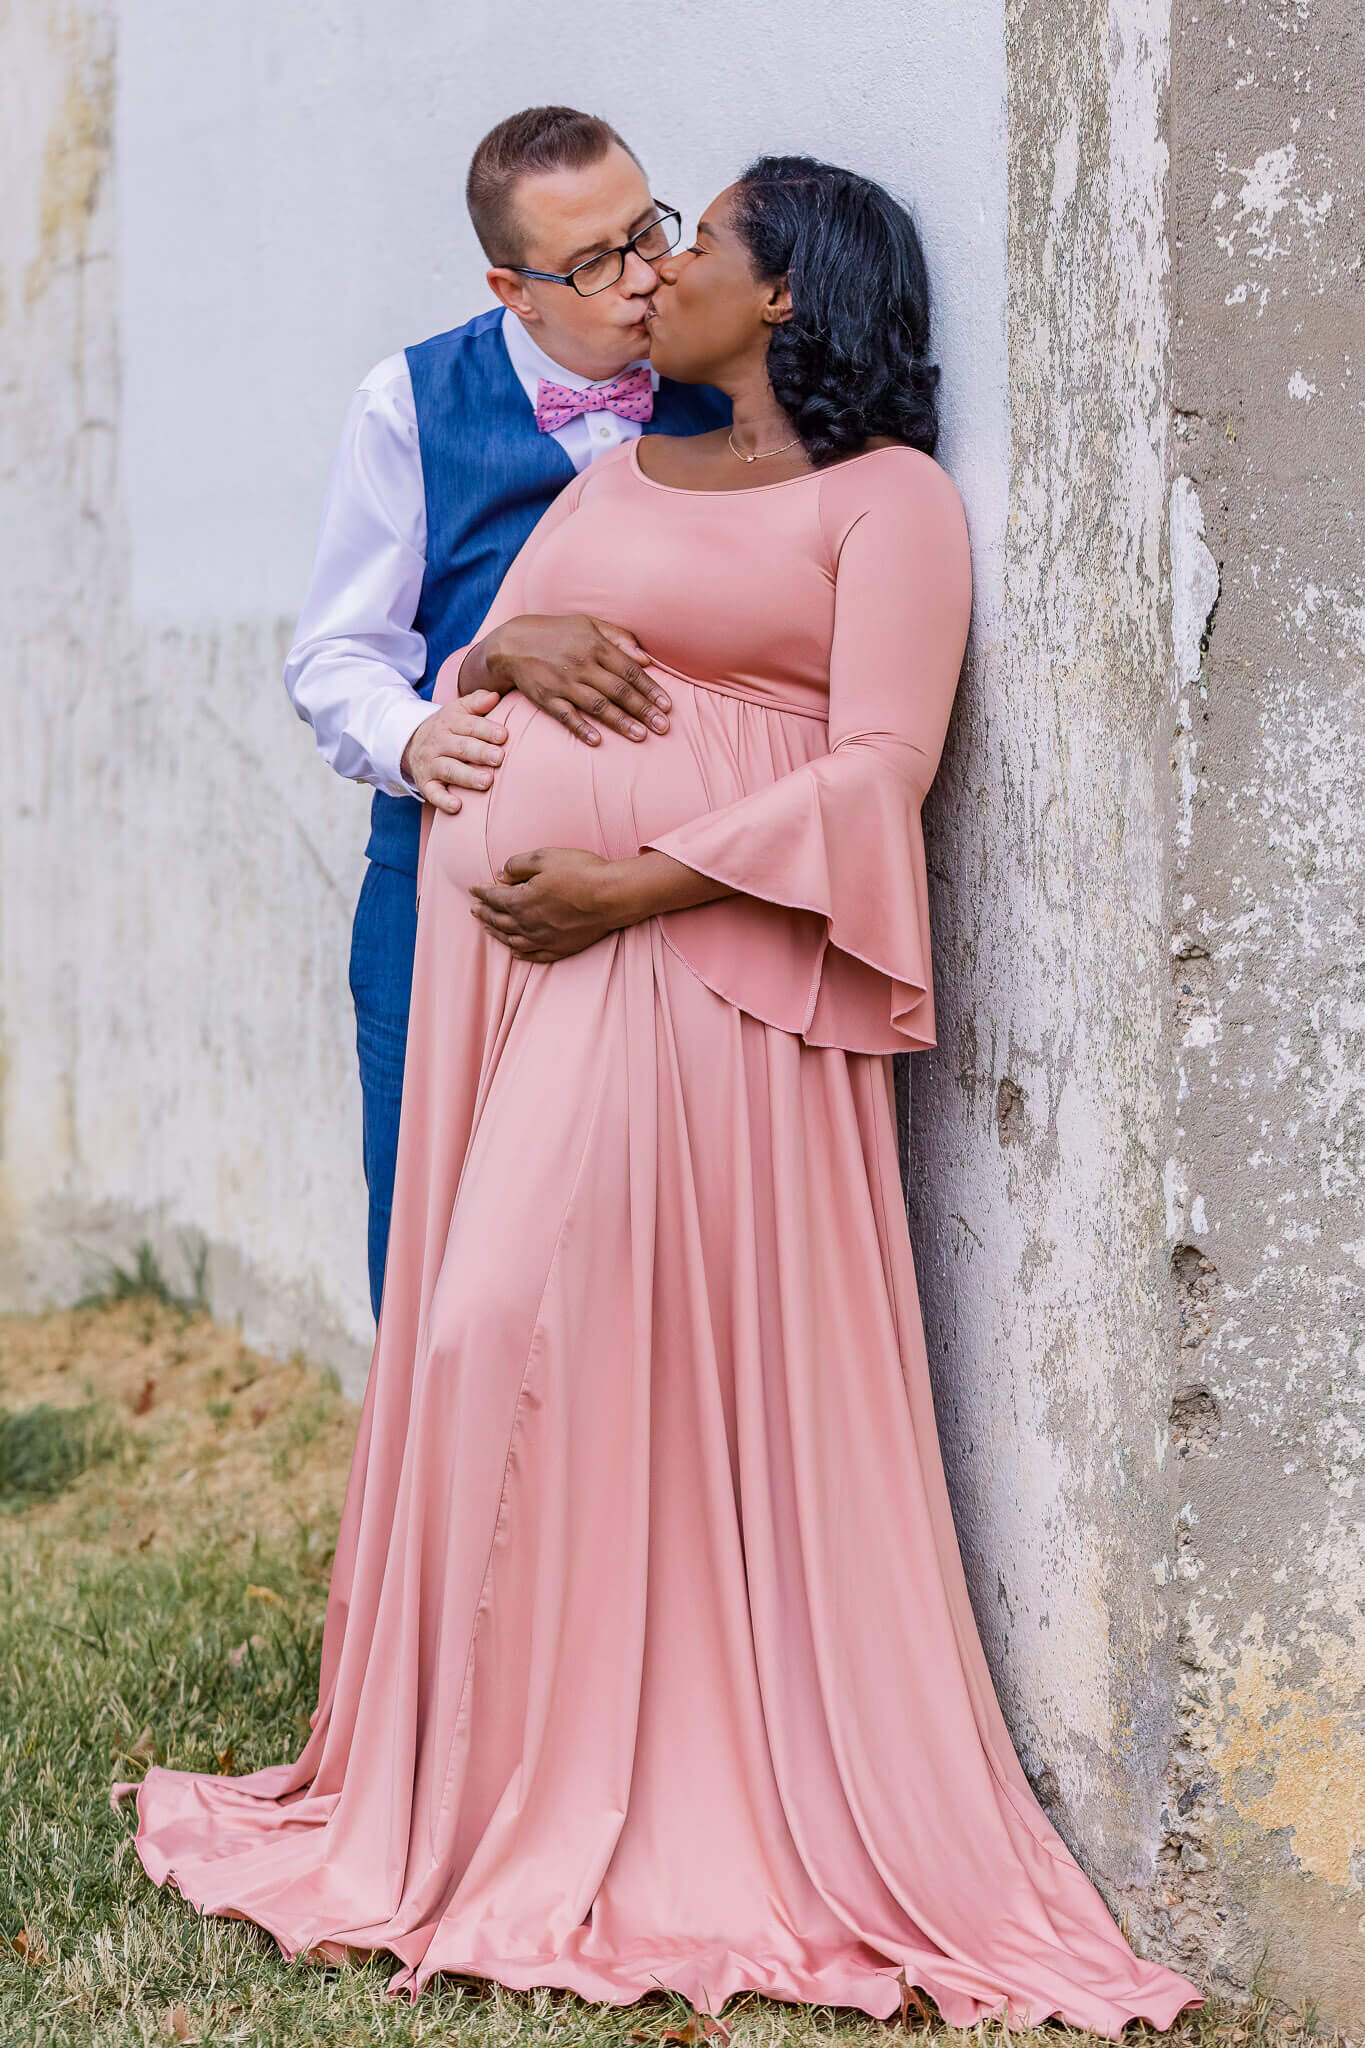 A happy couple embracing her pregnant belly during a maternity session.